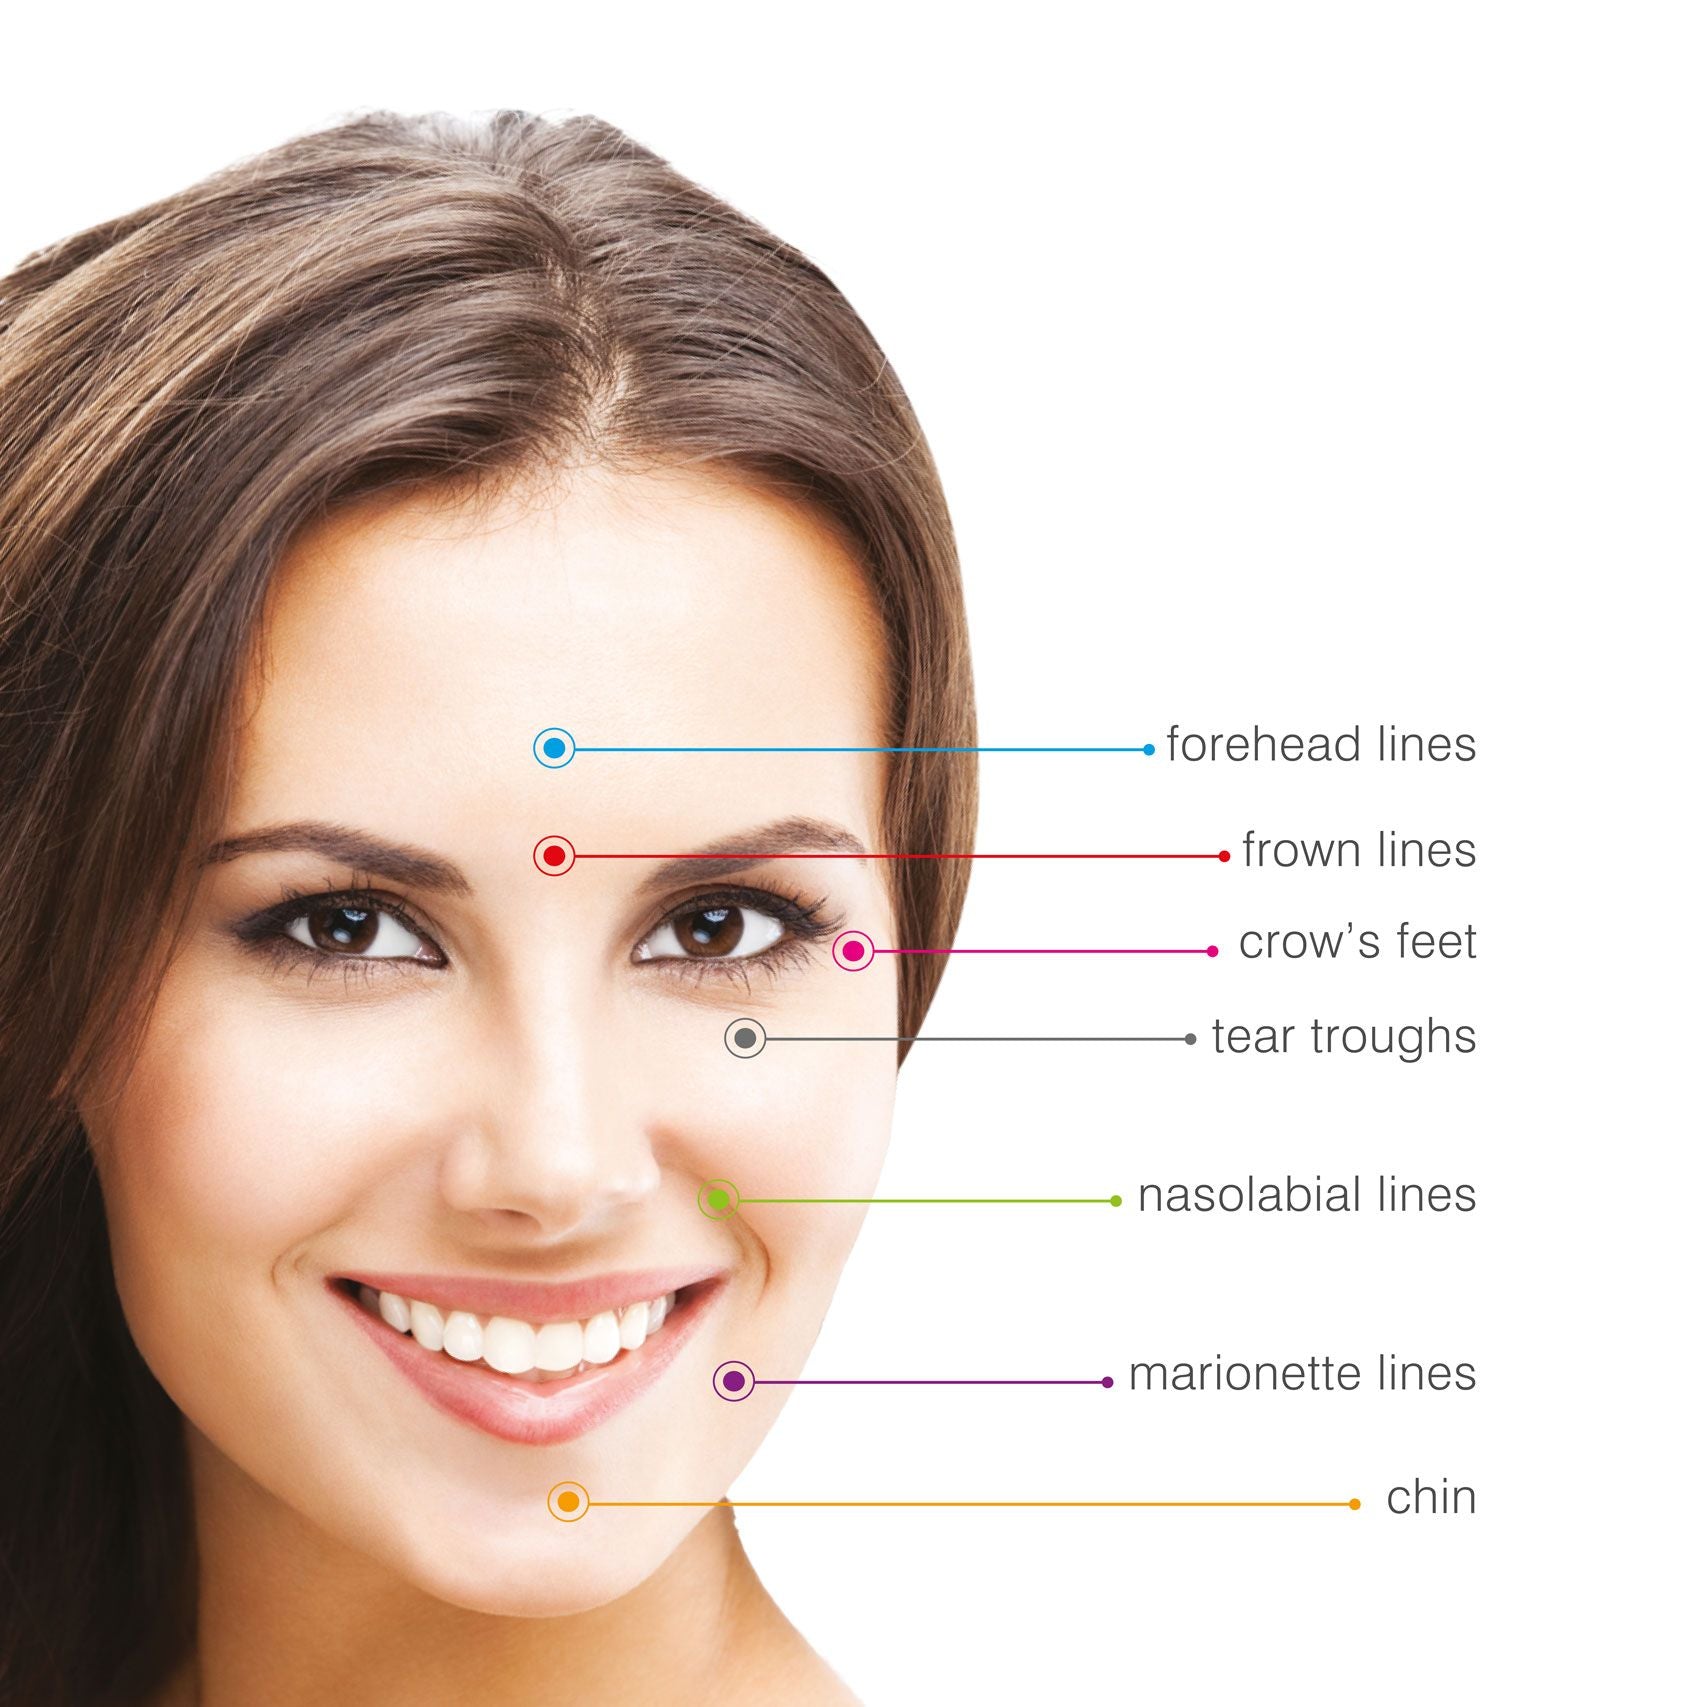 brunette smiling ladies face with colour coded arrows pointing to different areas of the face which can be treated with the Rio 60 second face lift forehead lines frown lines crows feet tear troughs nasolabial lines marionette lines chin